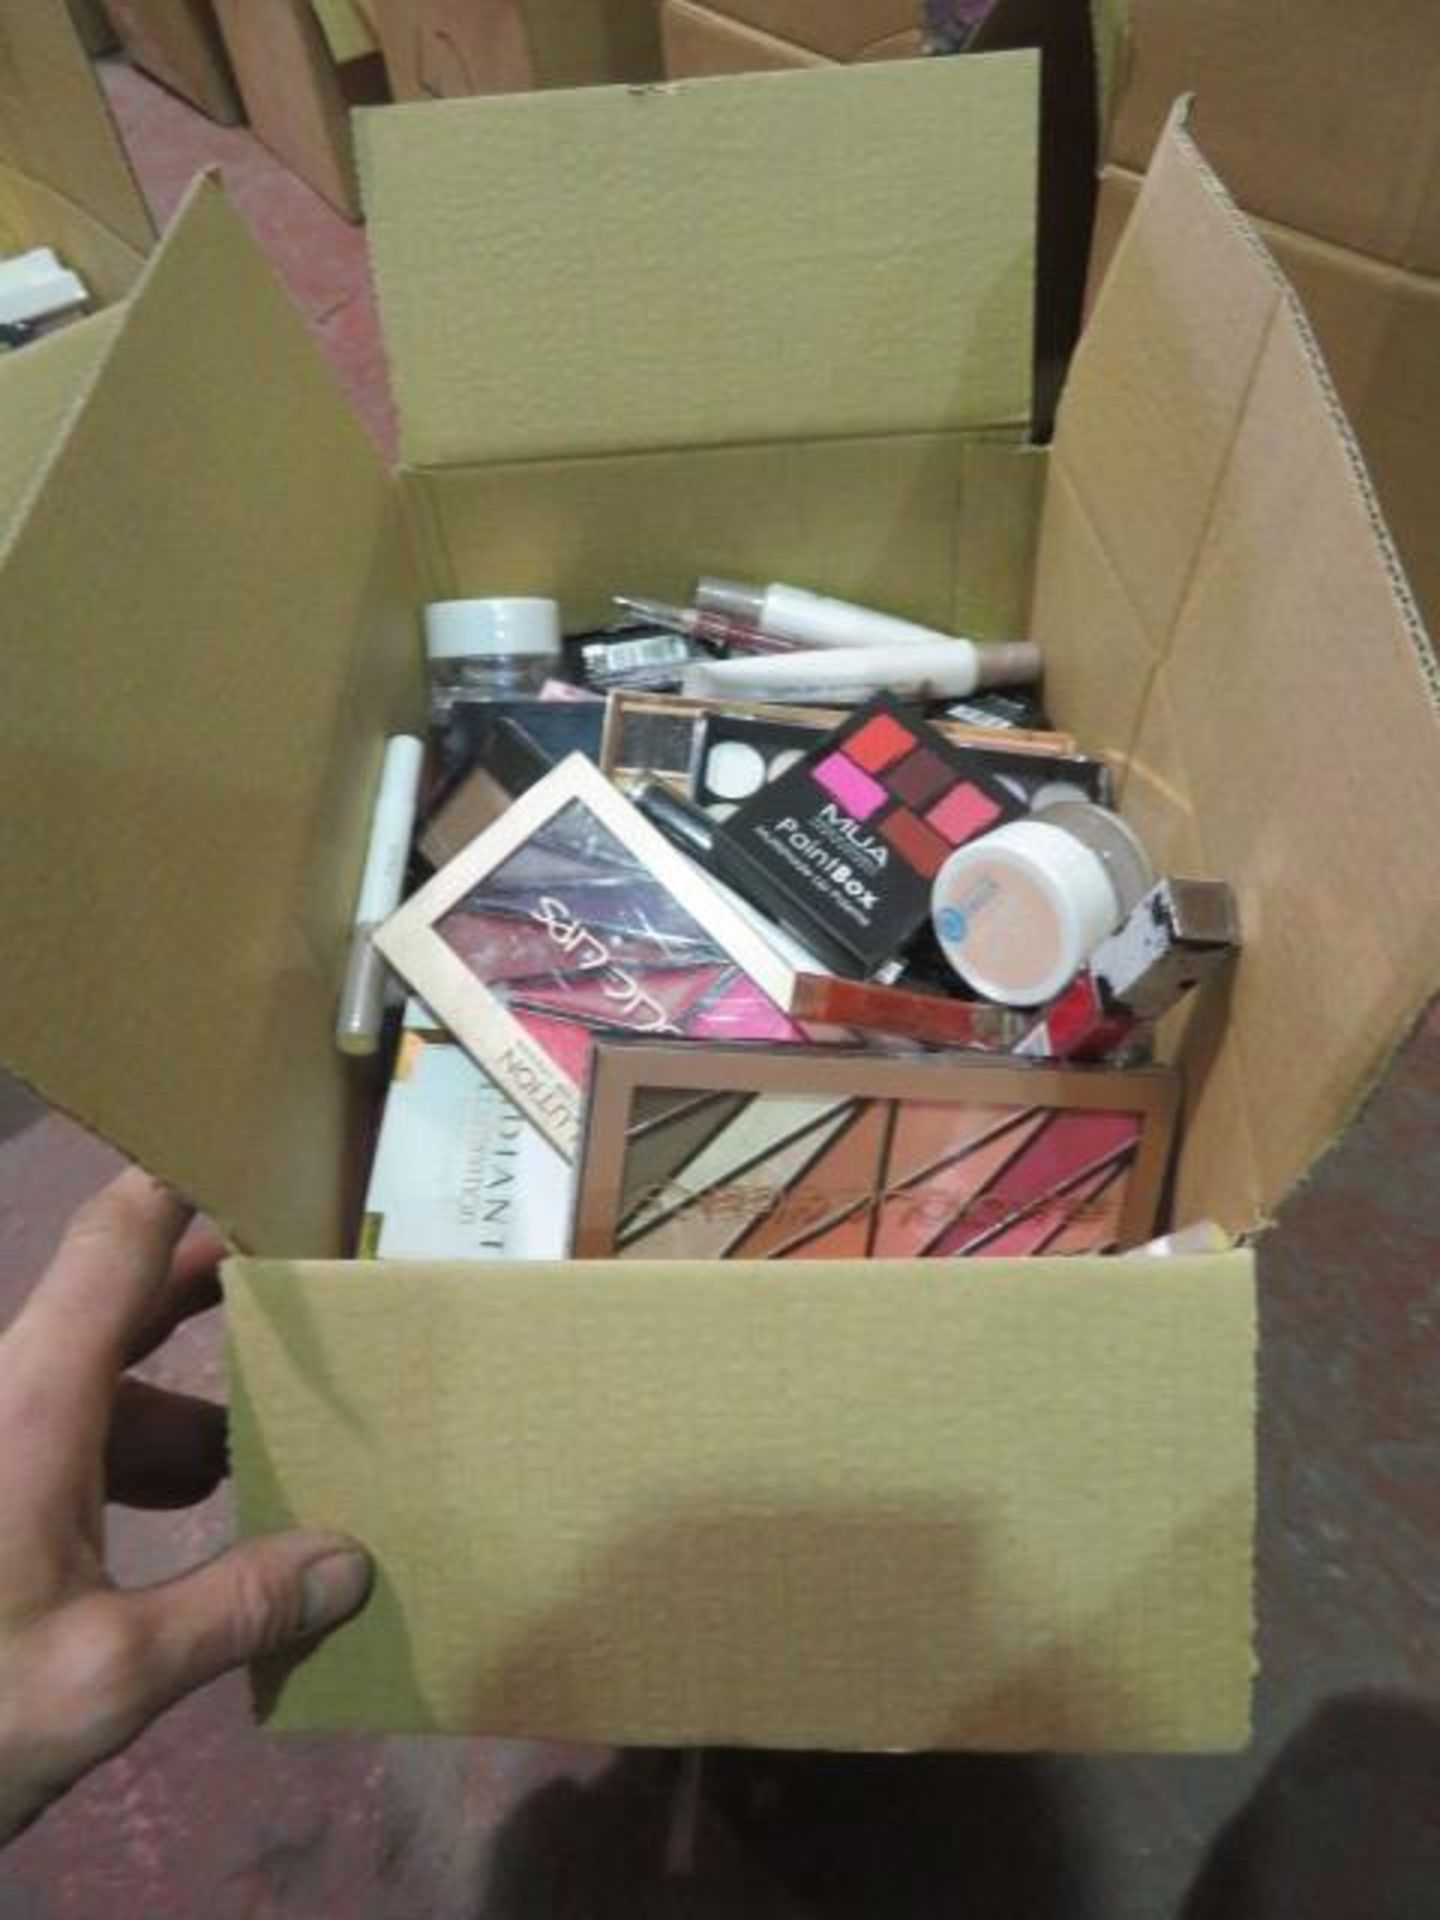 (Z66) Circa. 200 items of various new make up acadamy make up to include: revolution revoholic ... - Image 2 of 2